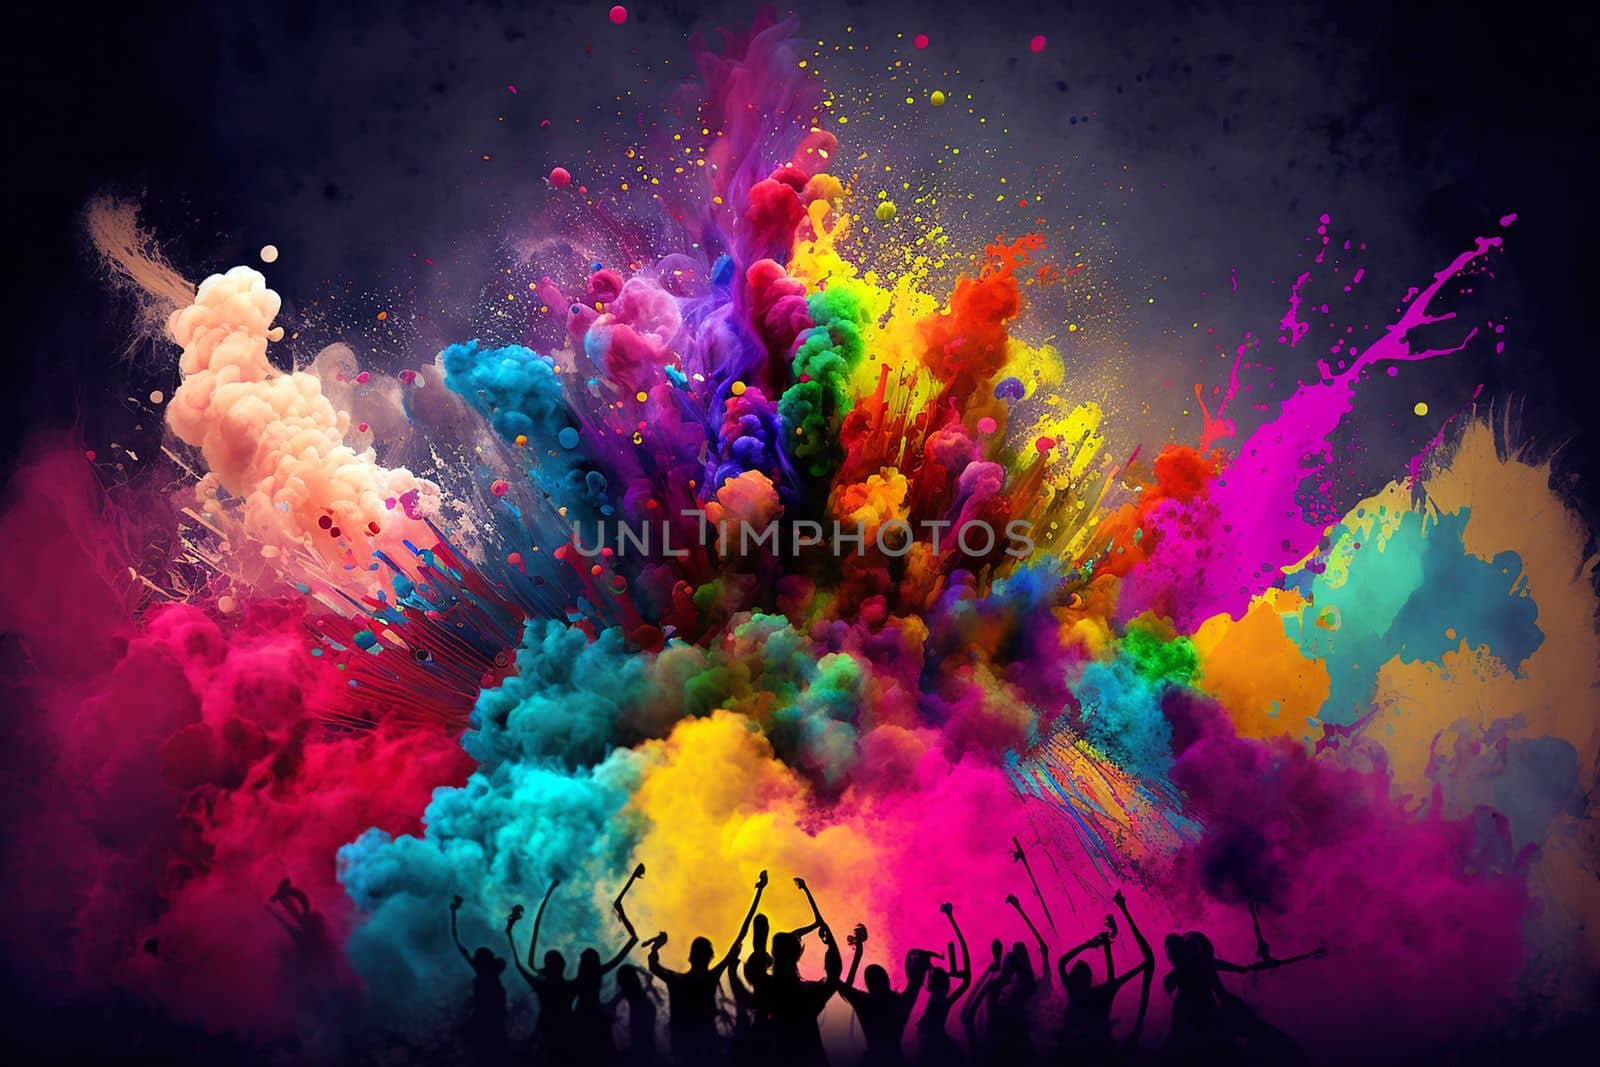 Splashes of paint on the Holi holiday colorful wallpaper background